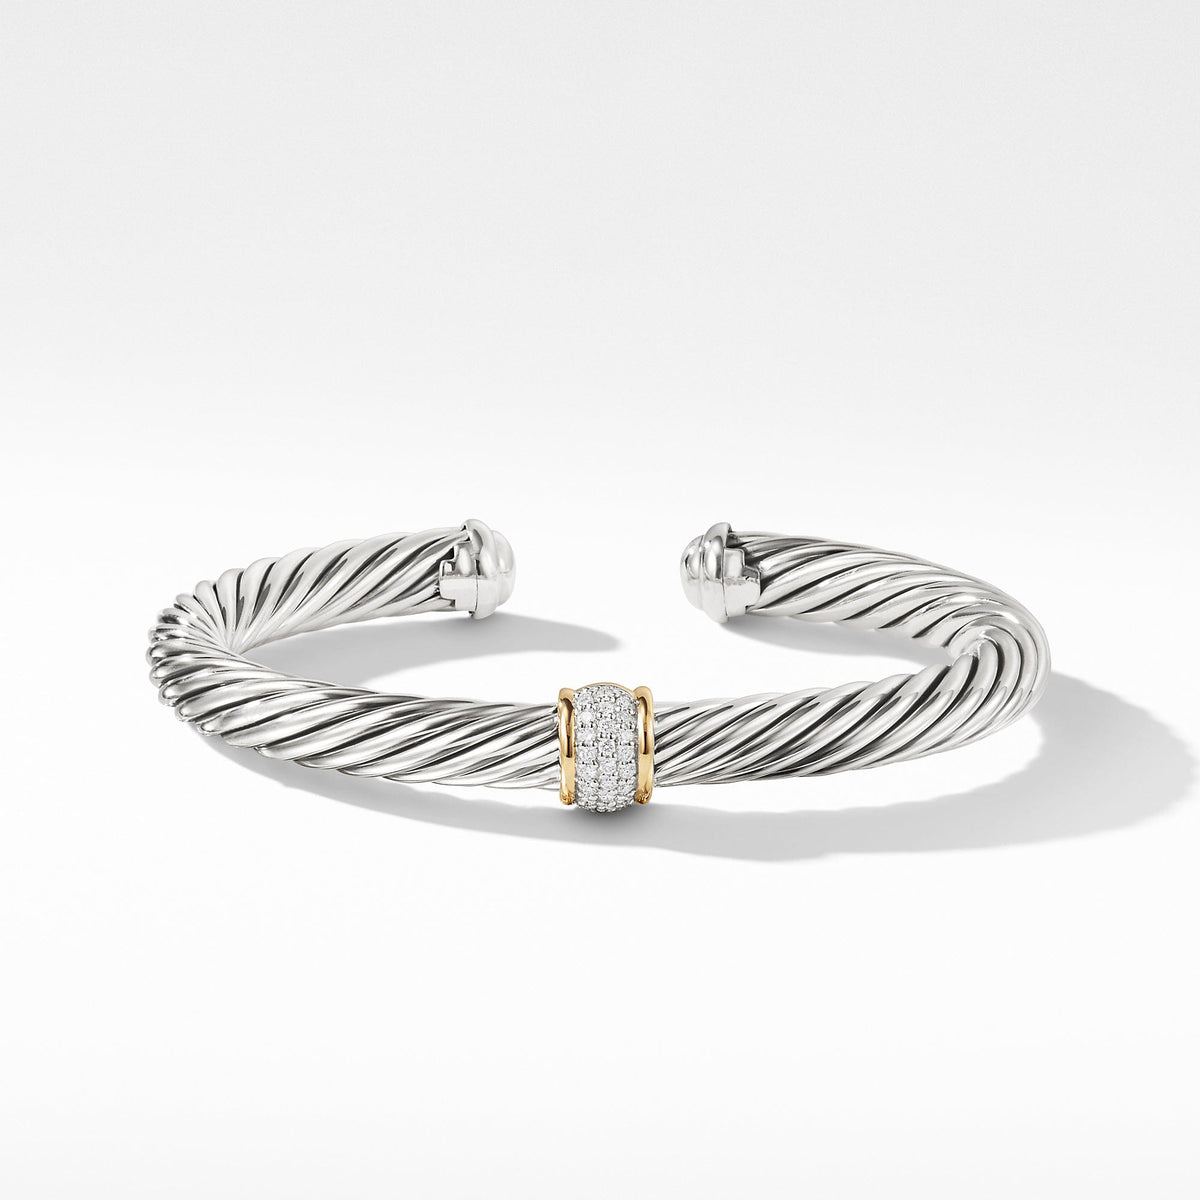 Bracelet with Diamonds and Gold